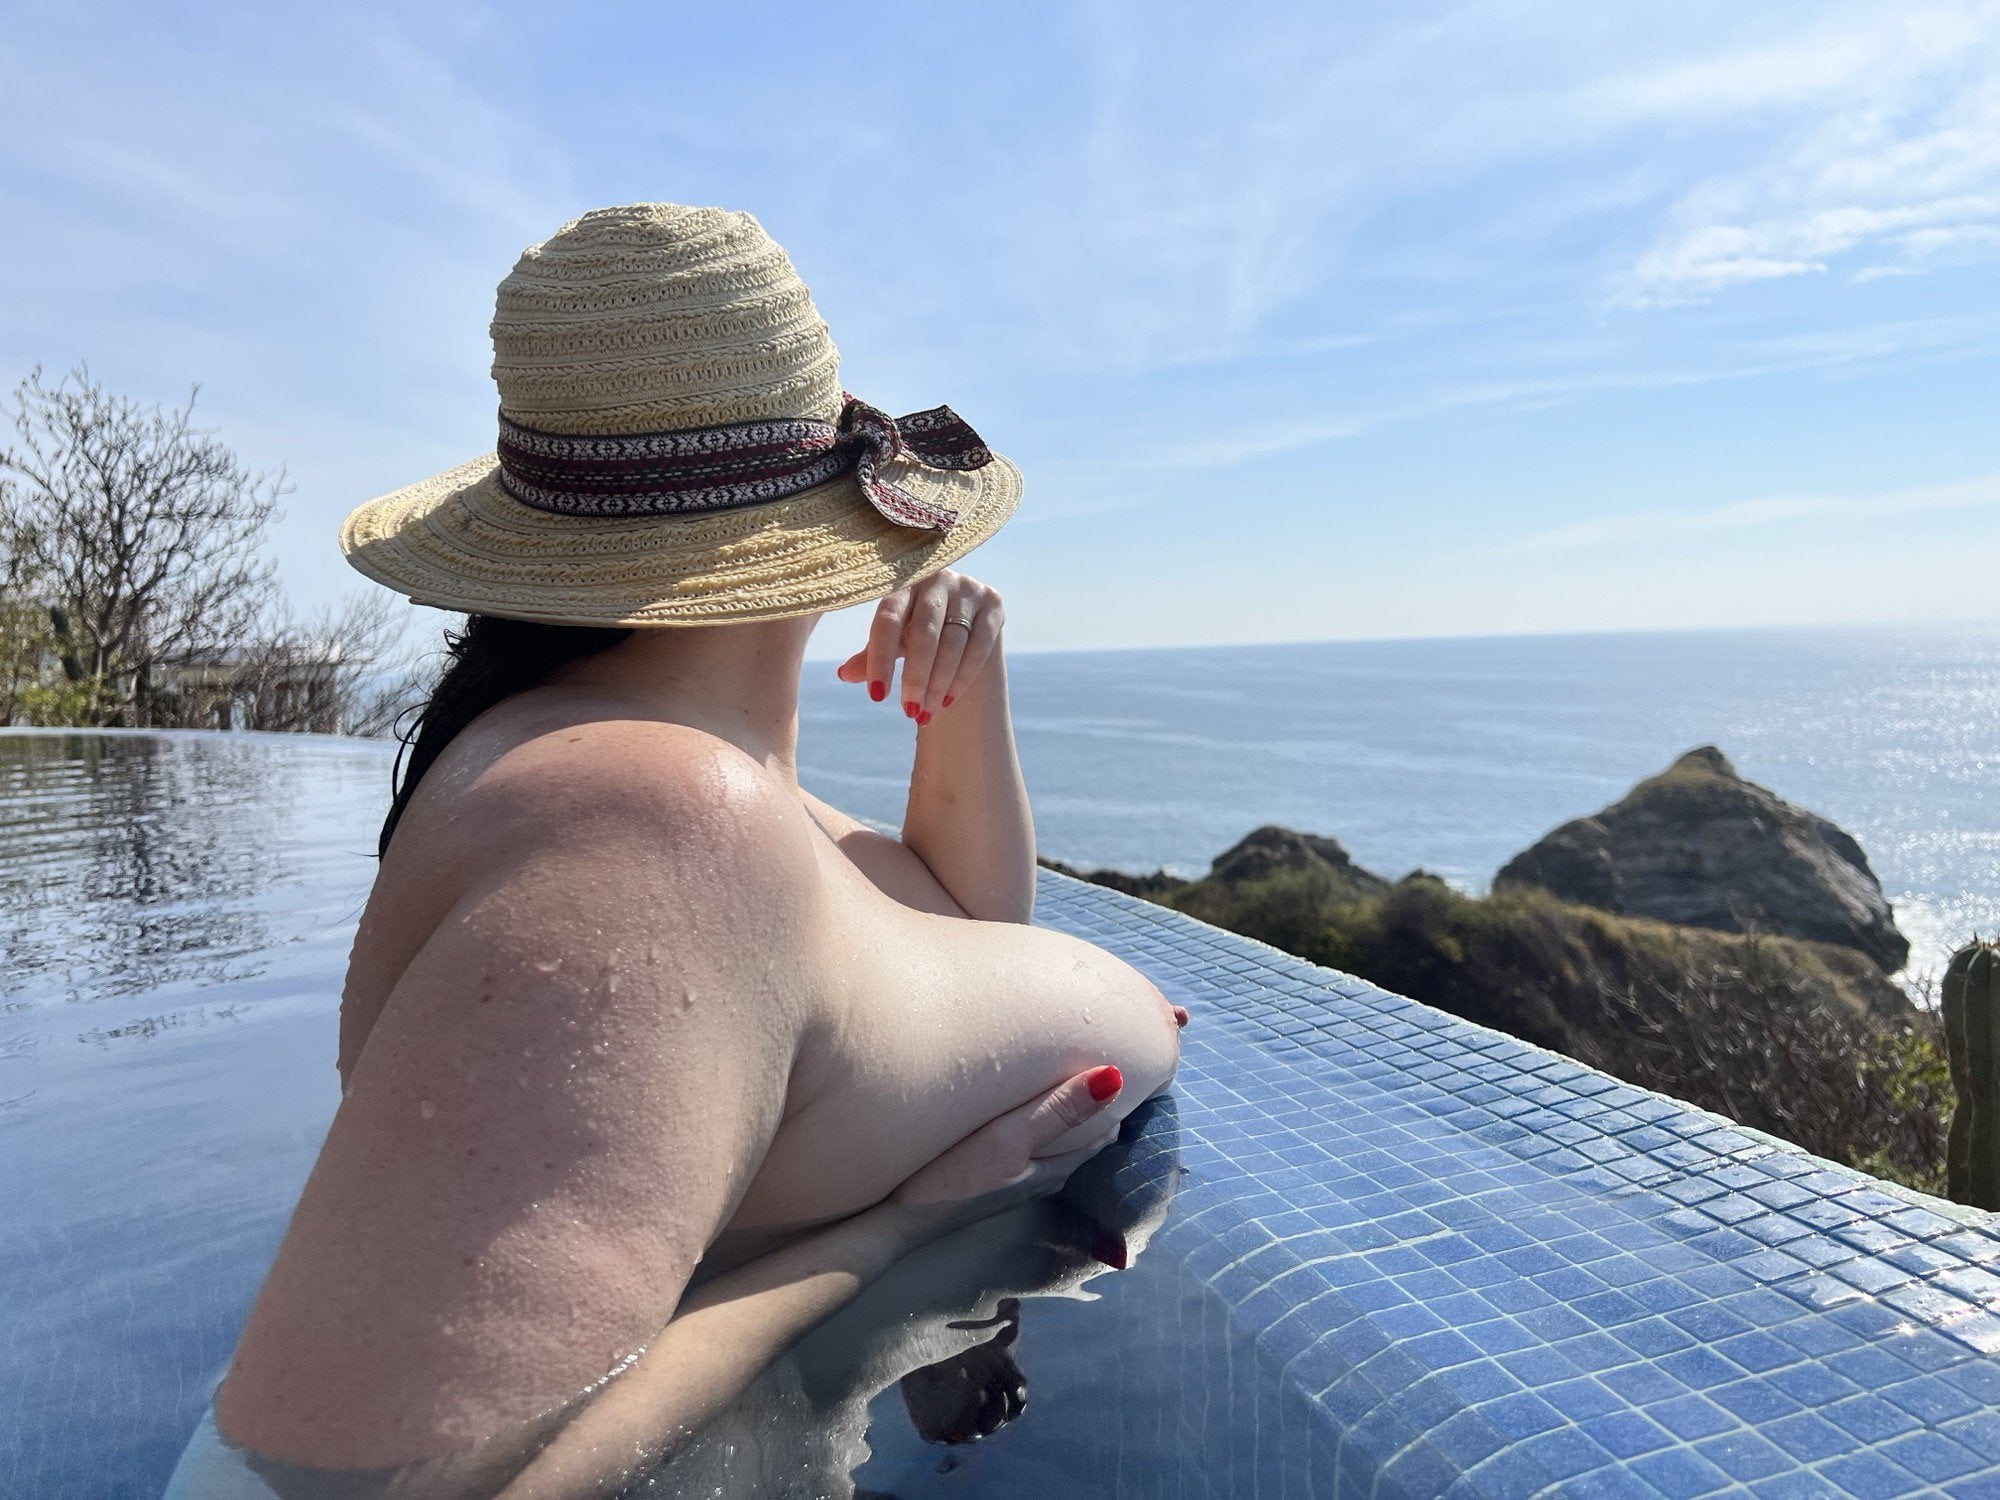 Best thing about this pool is the tit shelf 40f